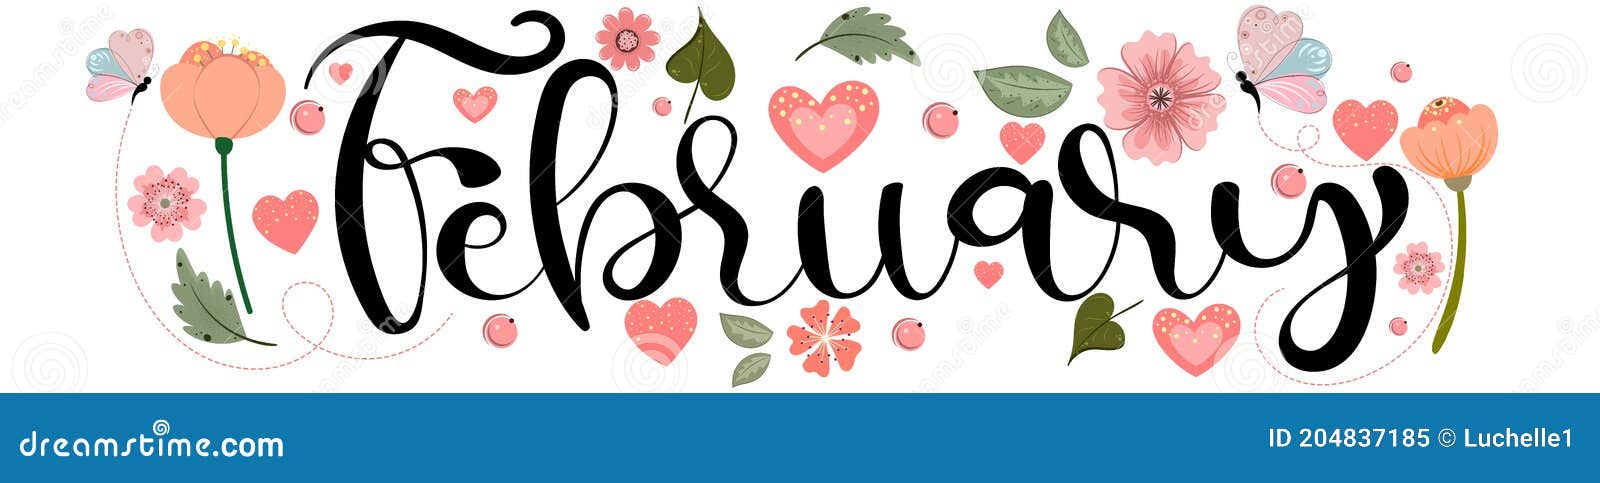 february . hello february text hand lettering with hearts of love and flowers